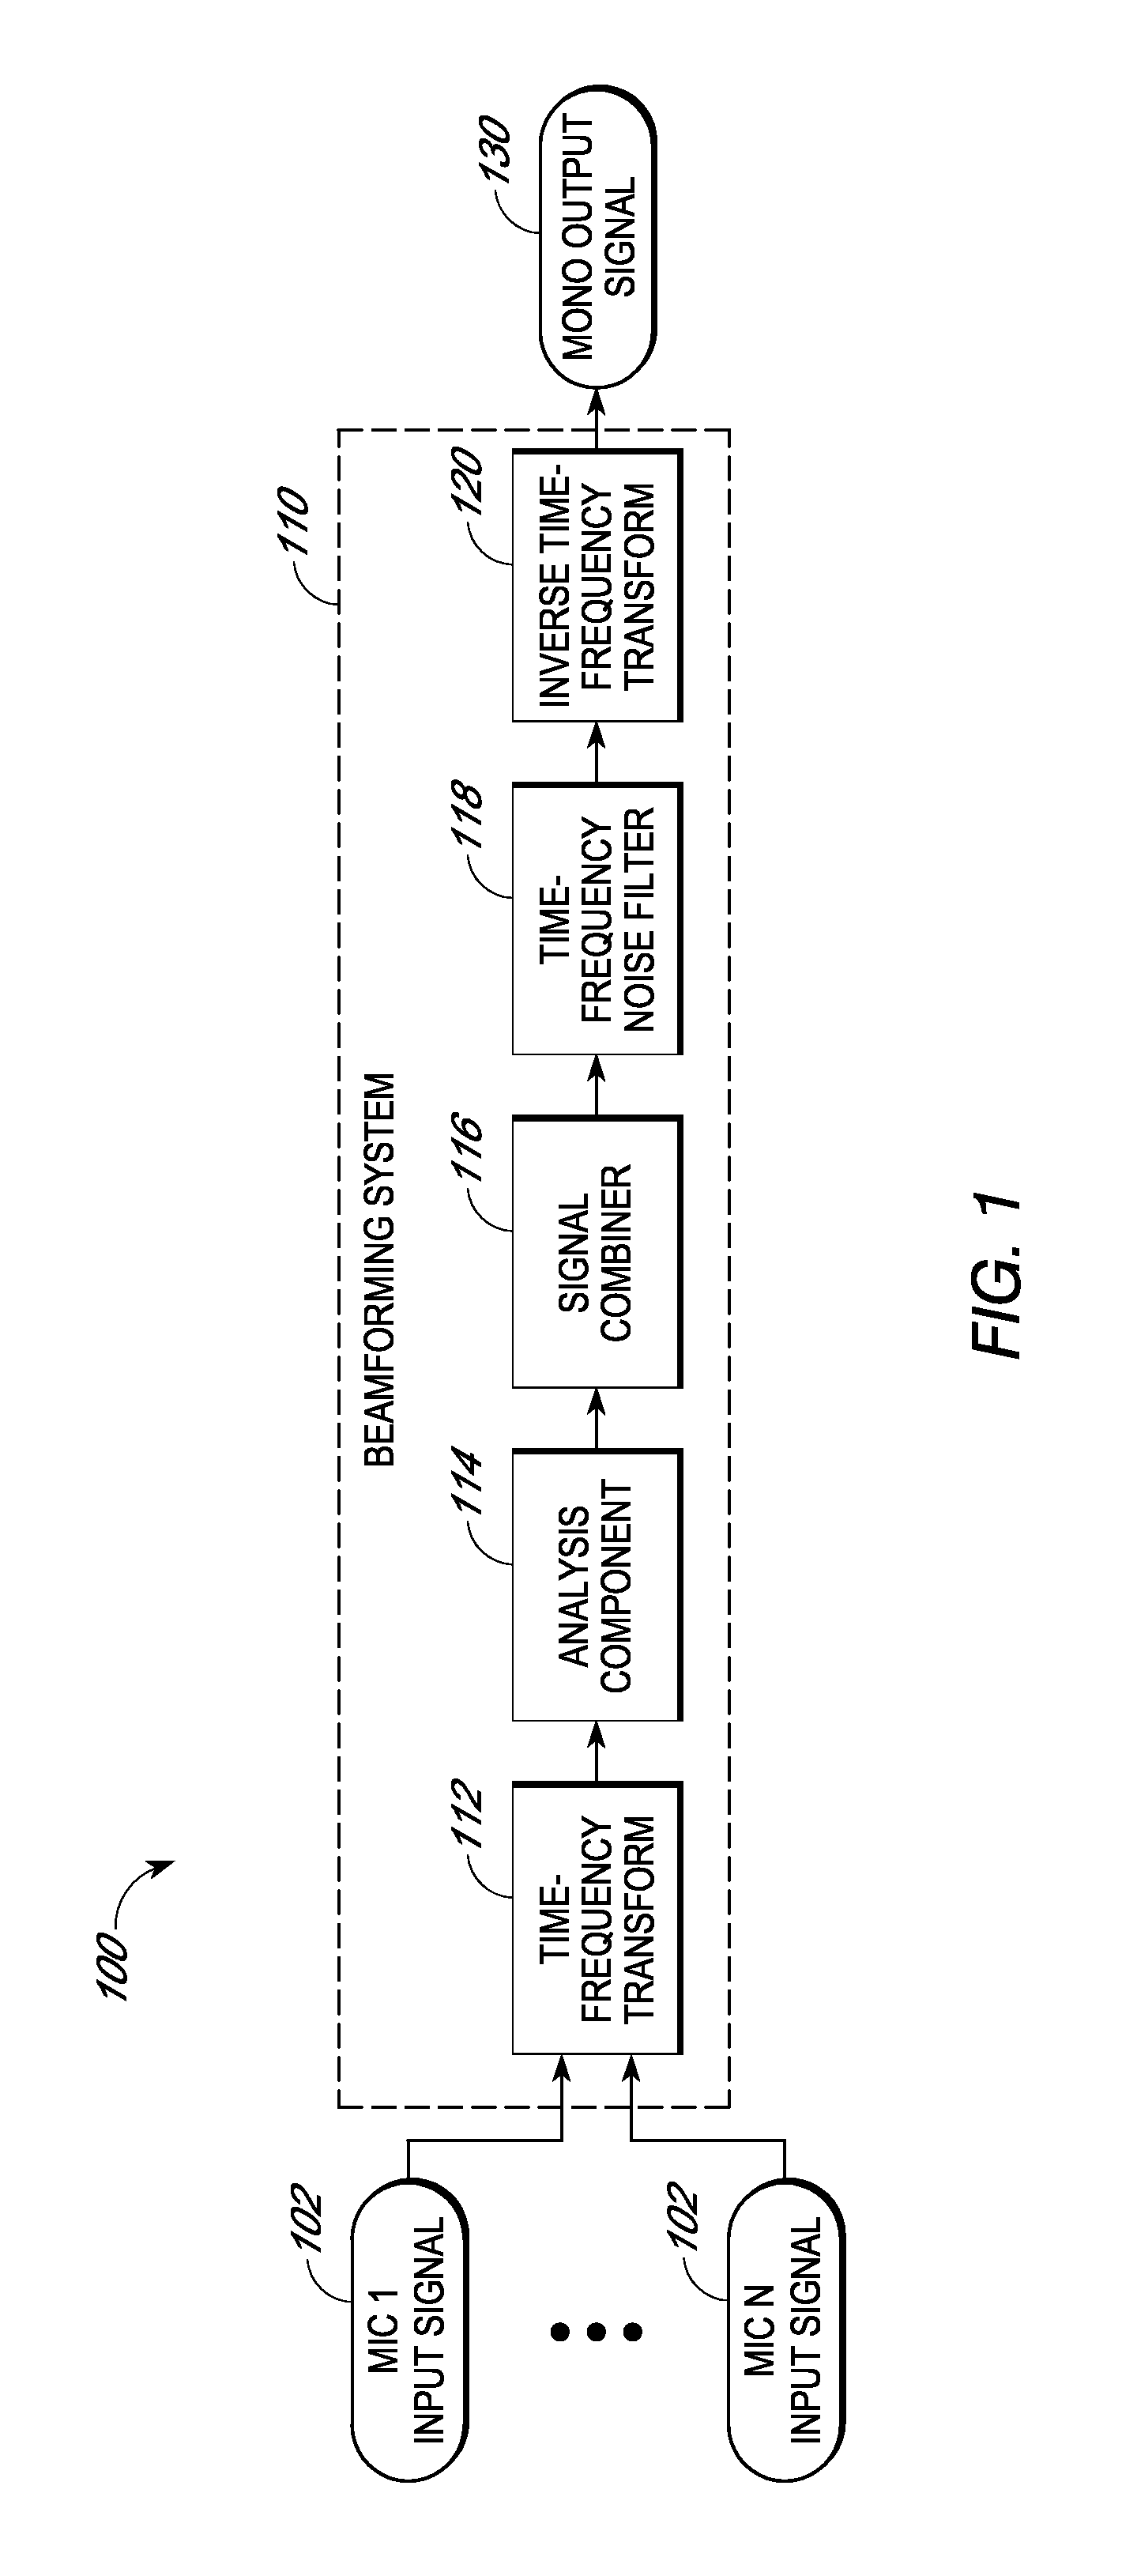 Microphone array processing system